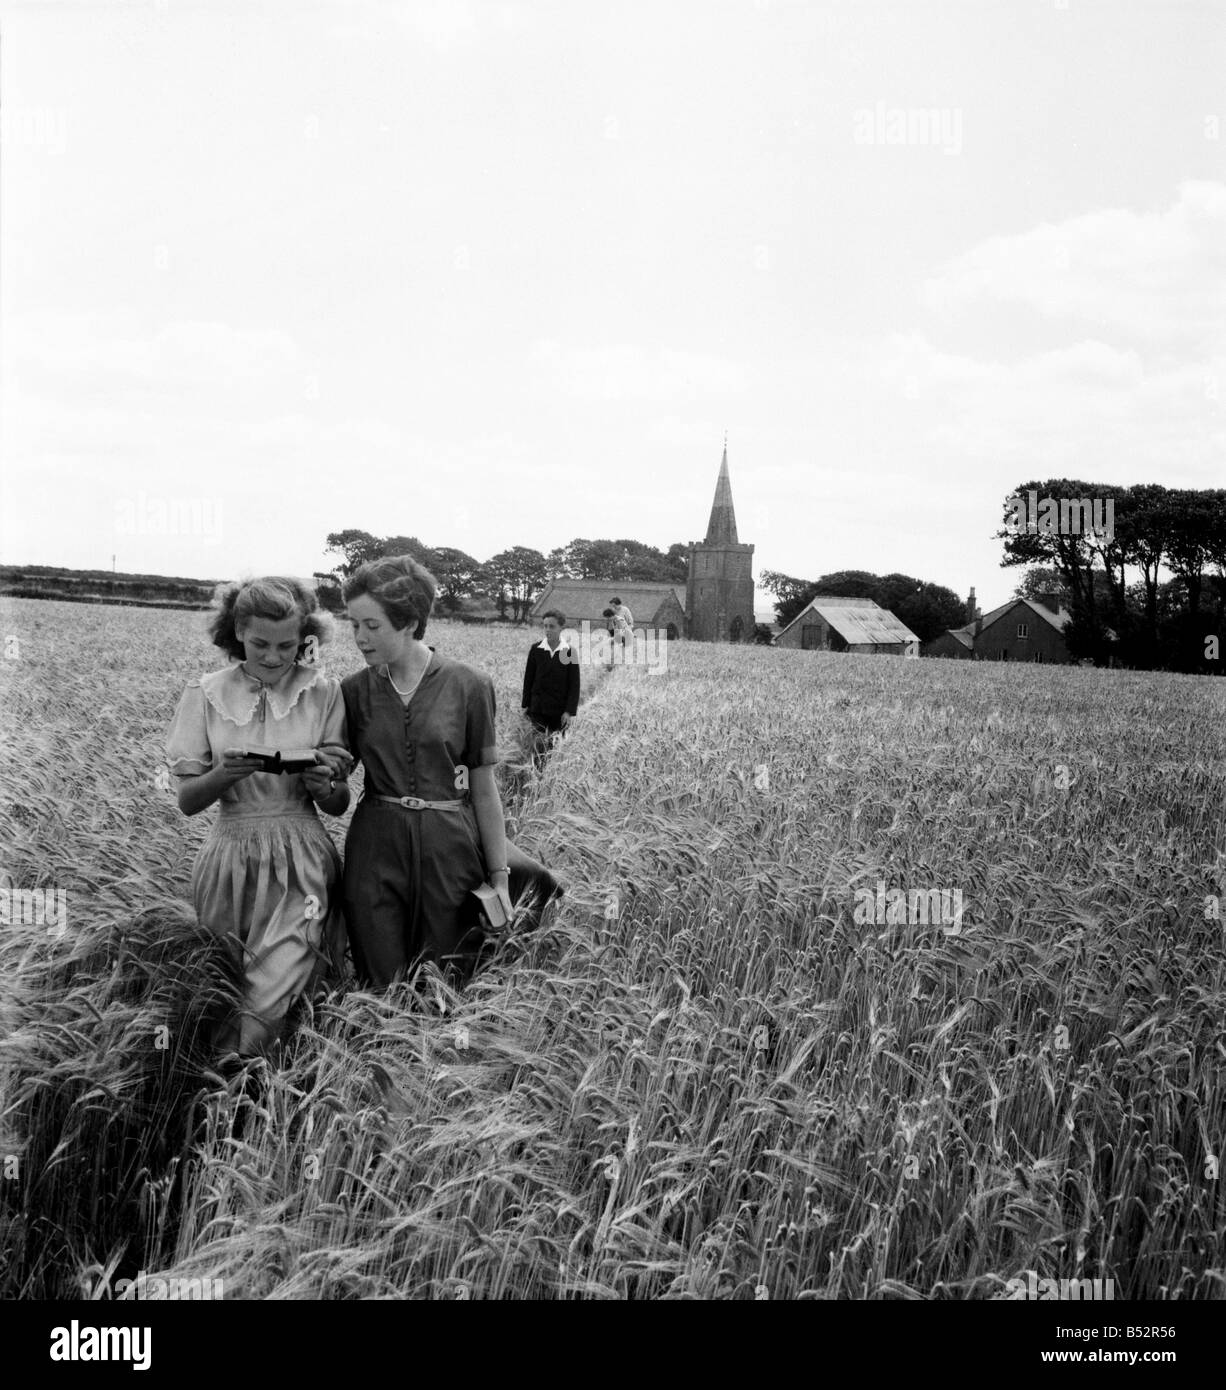 Walking through the barley field at Bigbury, South Devon Choirgirls Hannah (left) and Pamela Burgoyne, both aged ll, read text of the parson's sermon as they brush aside the ripening knee high barley through the tiny path. ;July 1952 ;C3824 Stock Photo